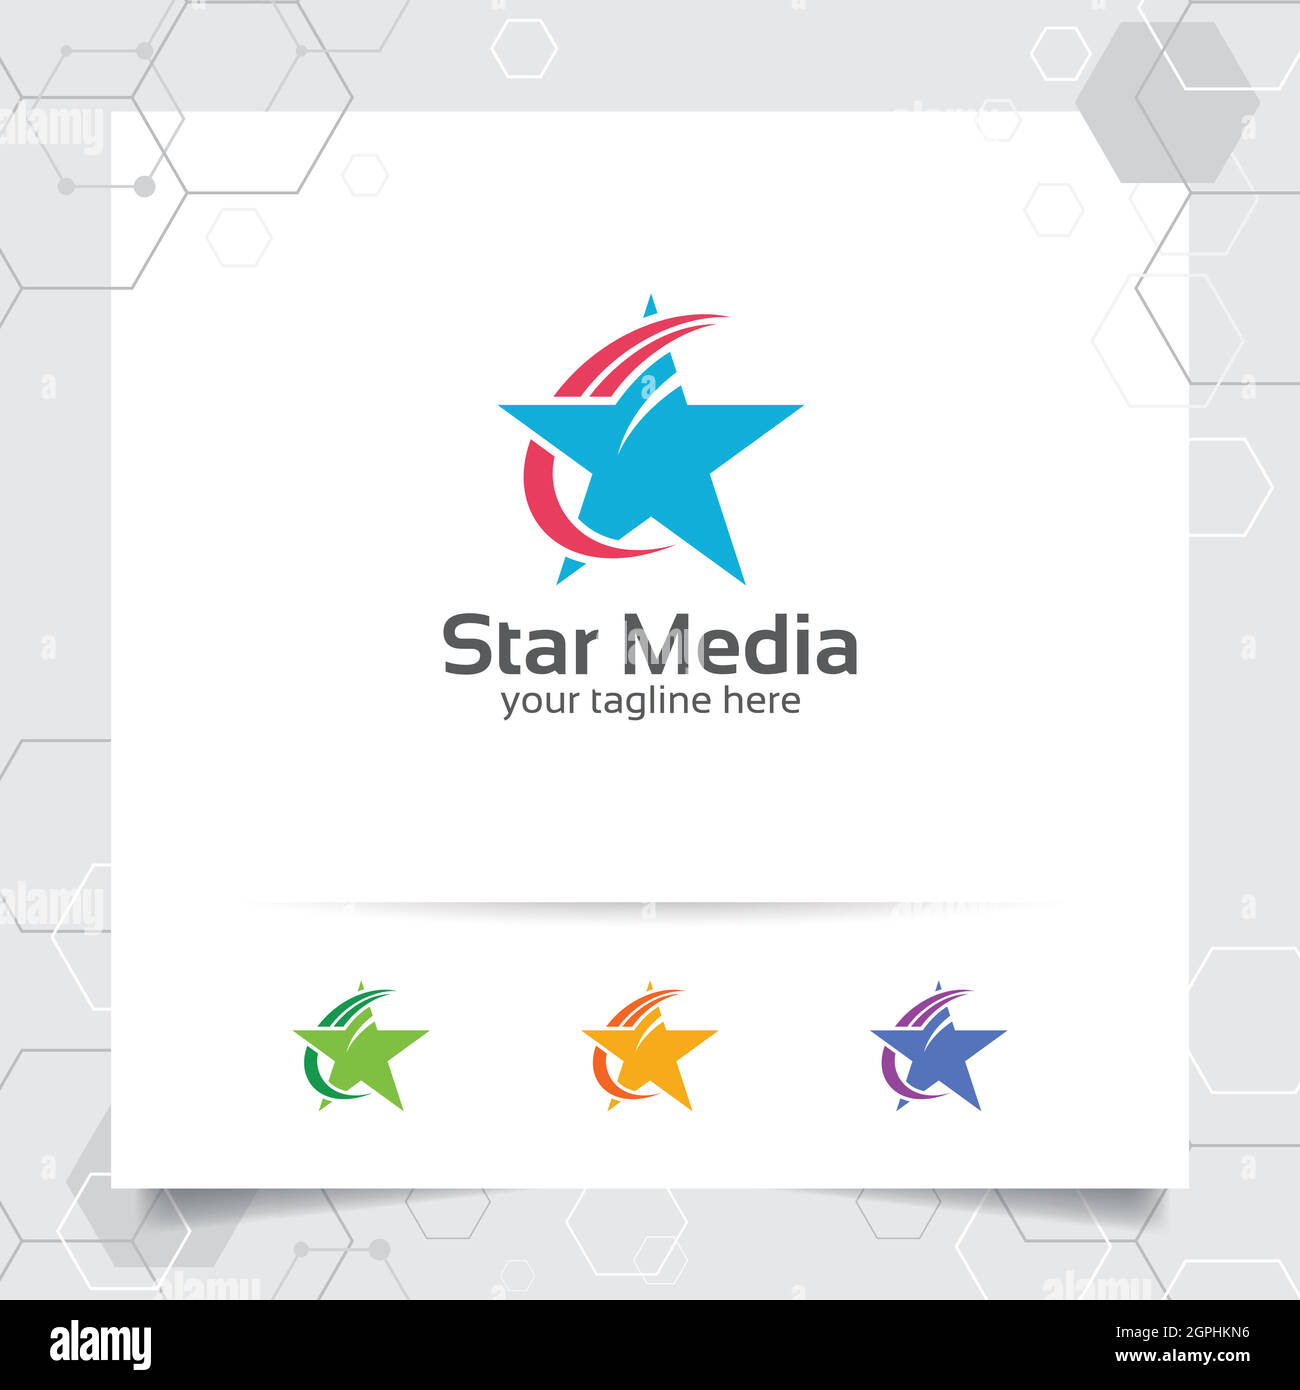 Star logo design concept of arrow symbol element, abstract star vector logo used for finance, accounting and consulting. Stock Vector